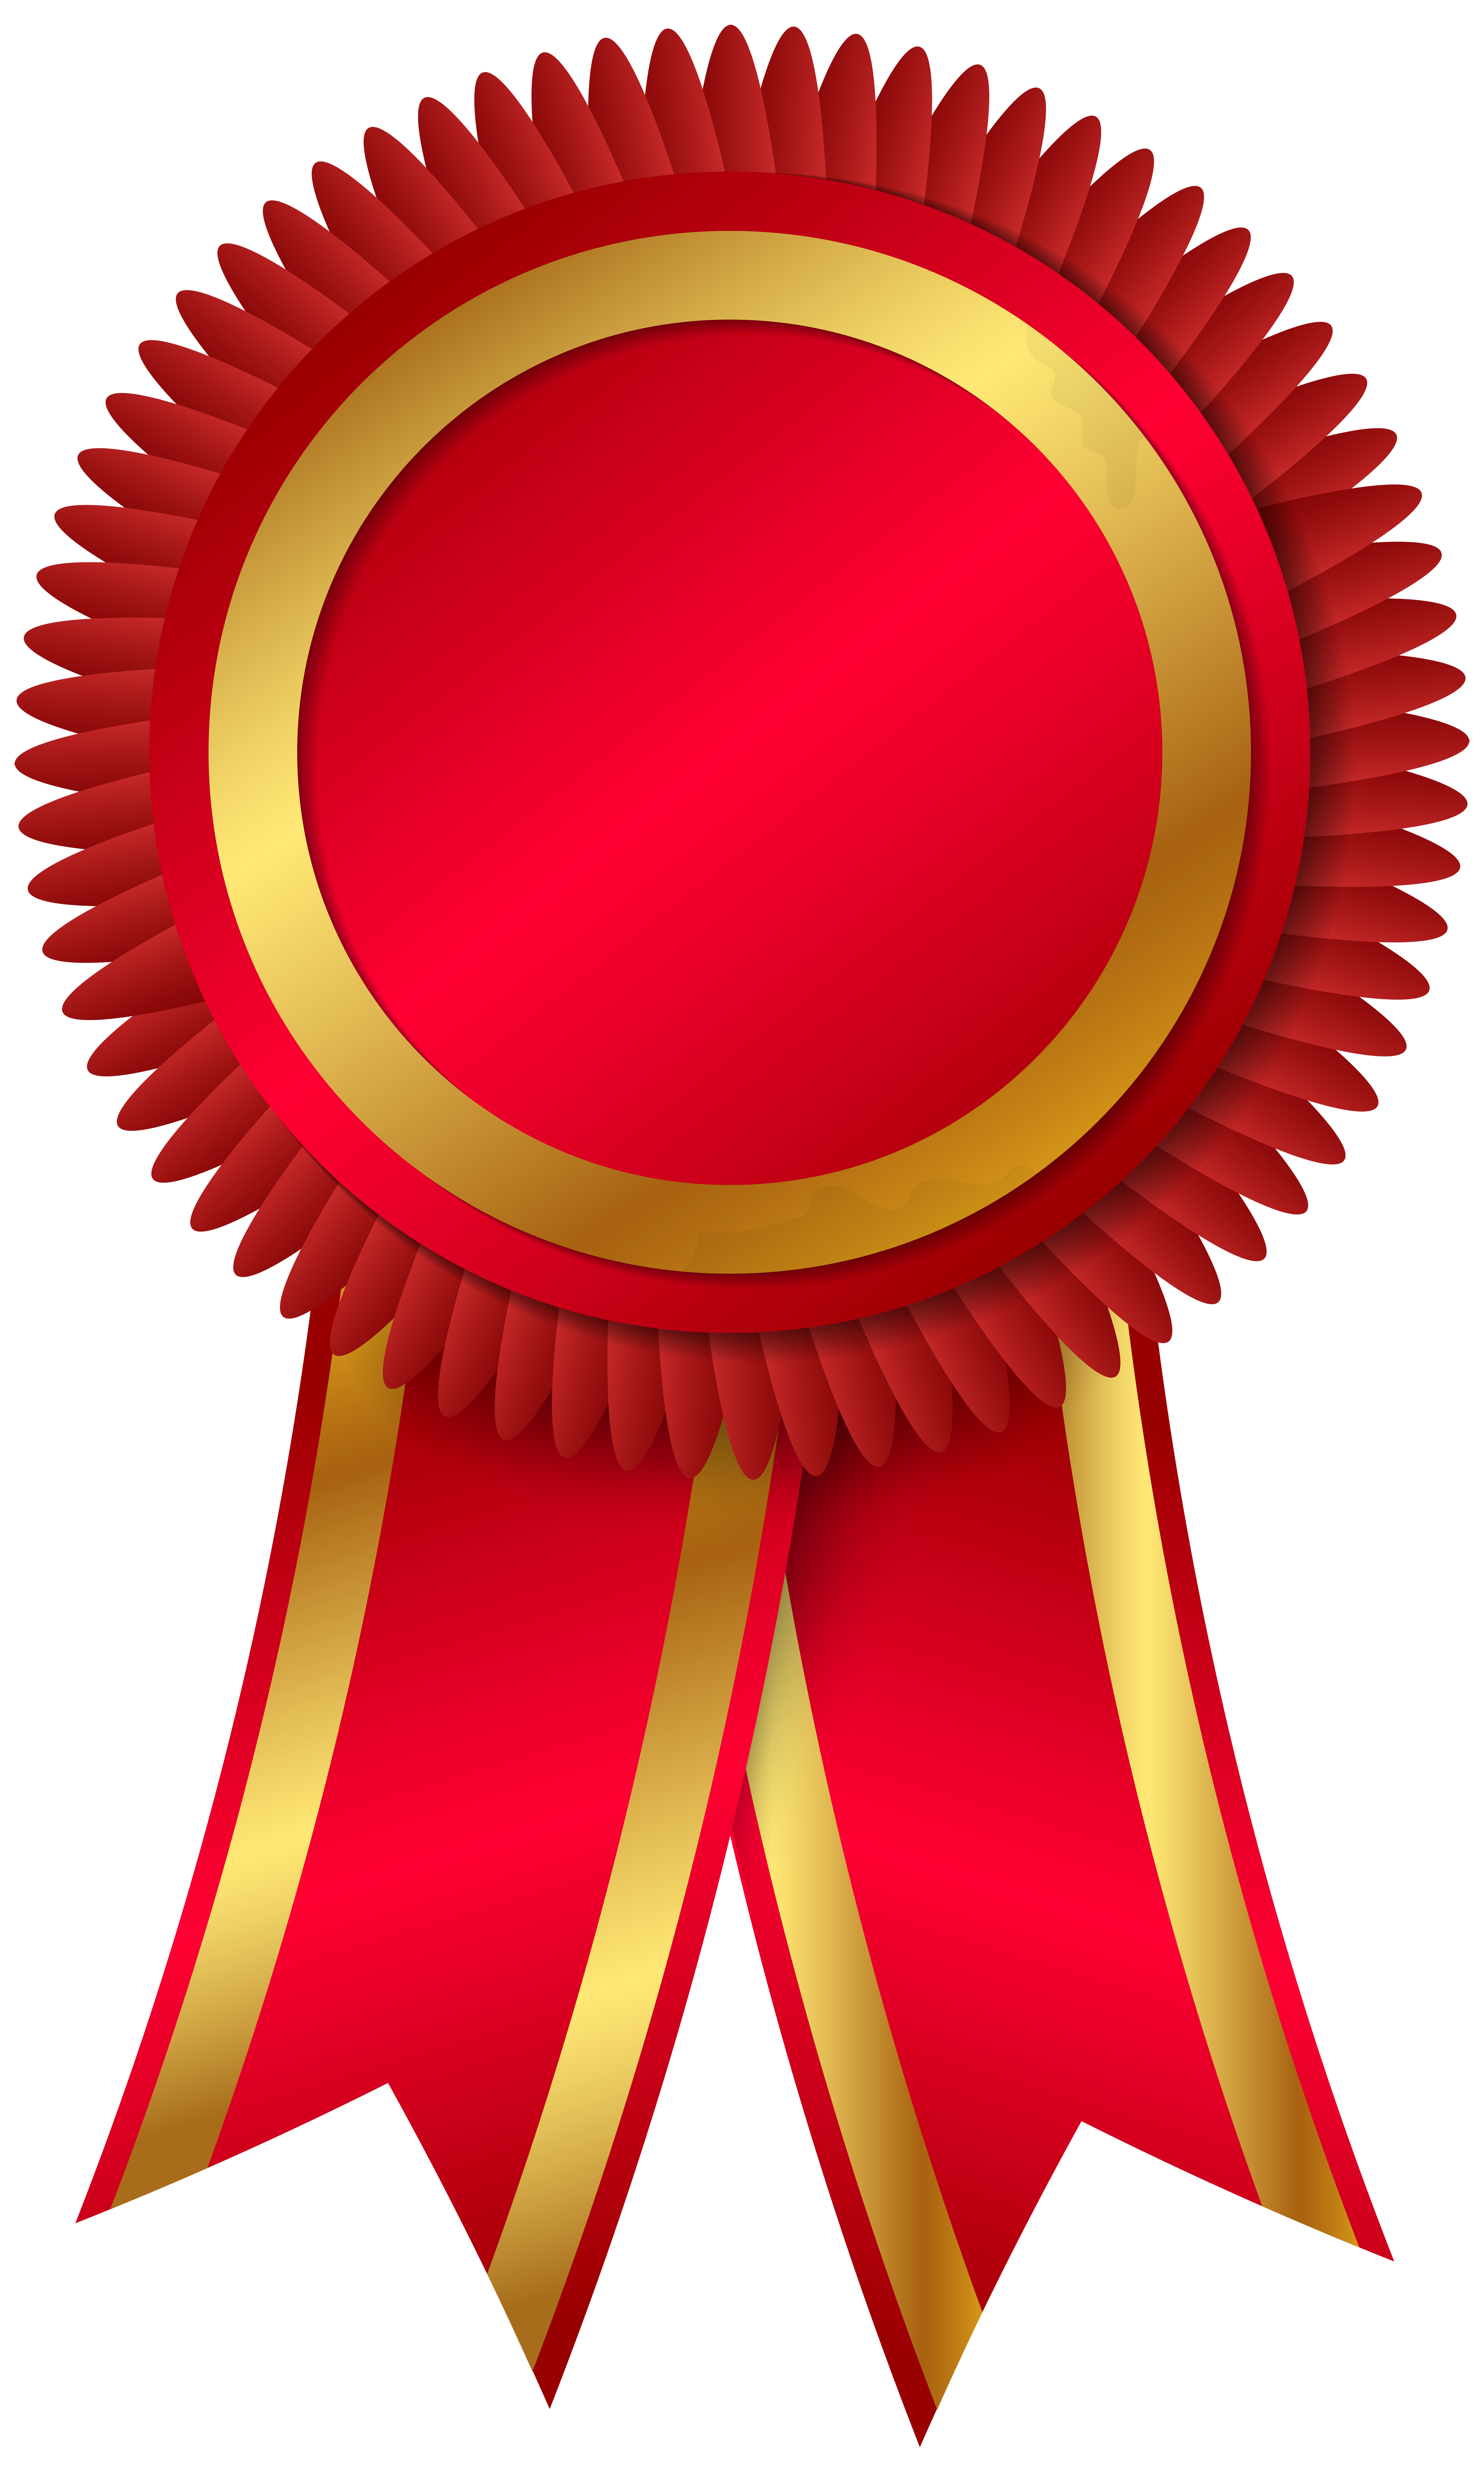 Golden Ribbon Rosette Award Cup PNG Image High Quality Clipart